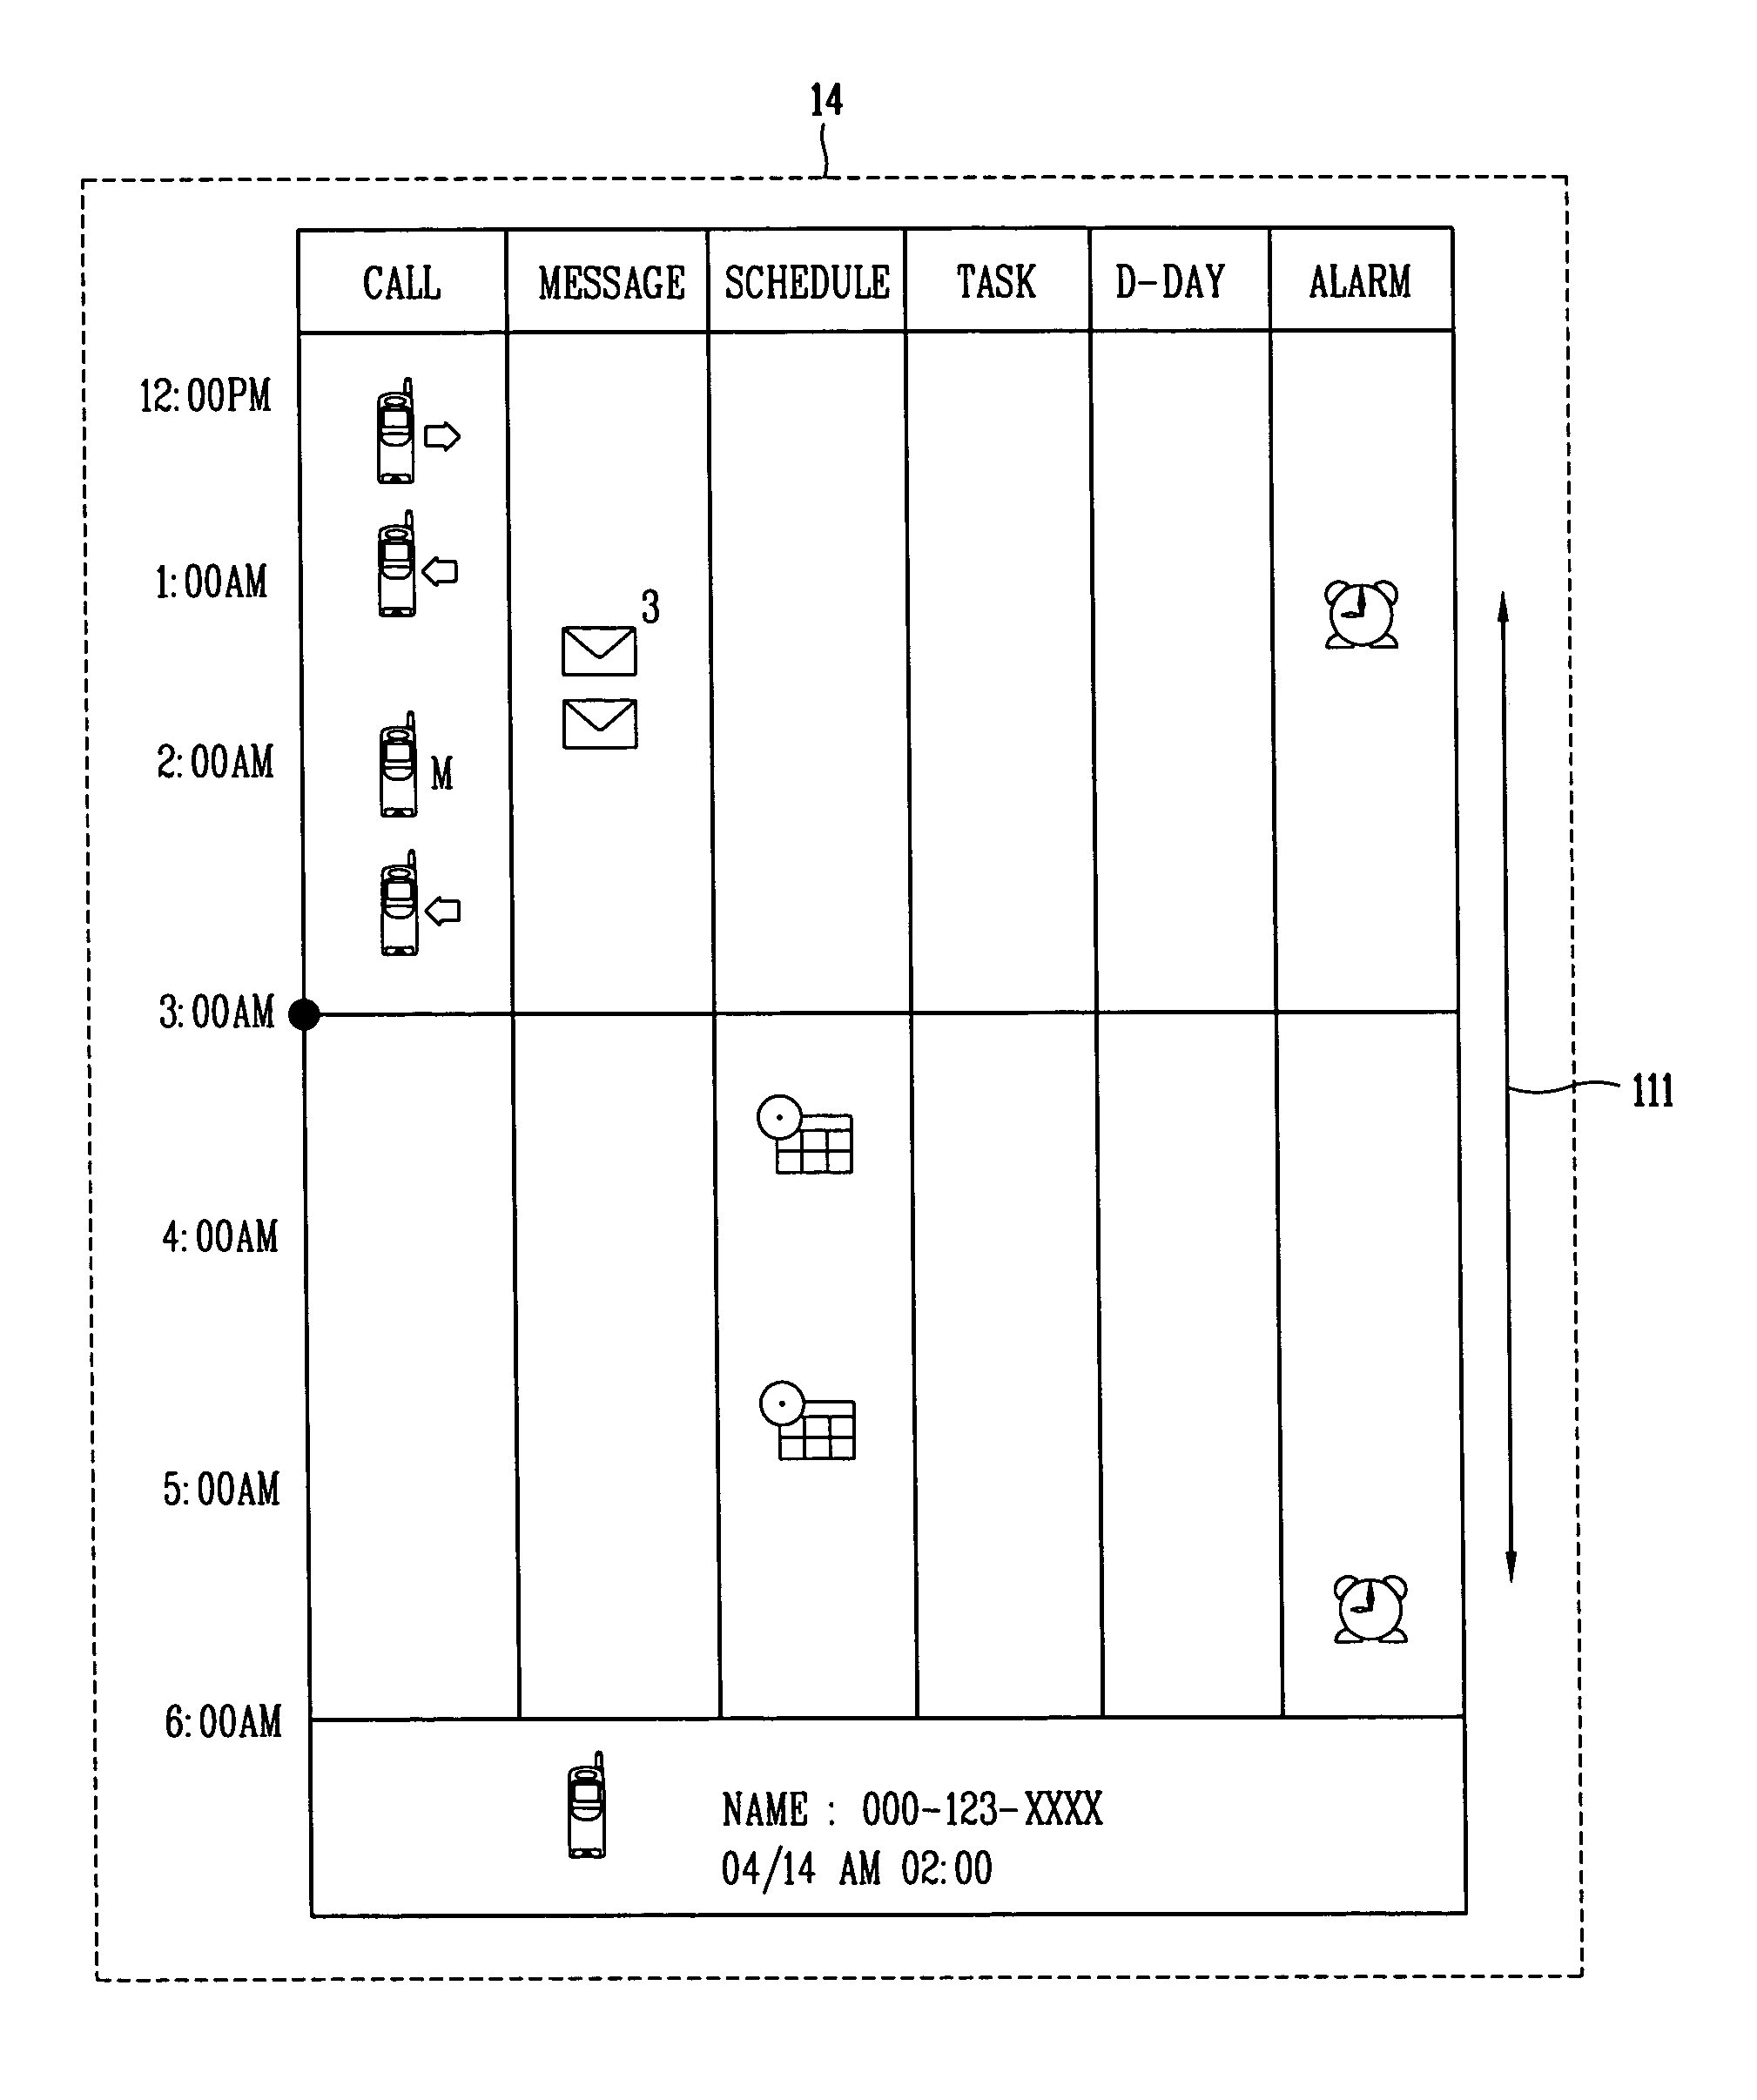 Event display apparatus for mobile communication terminal and method thereof